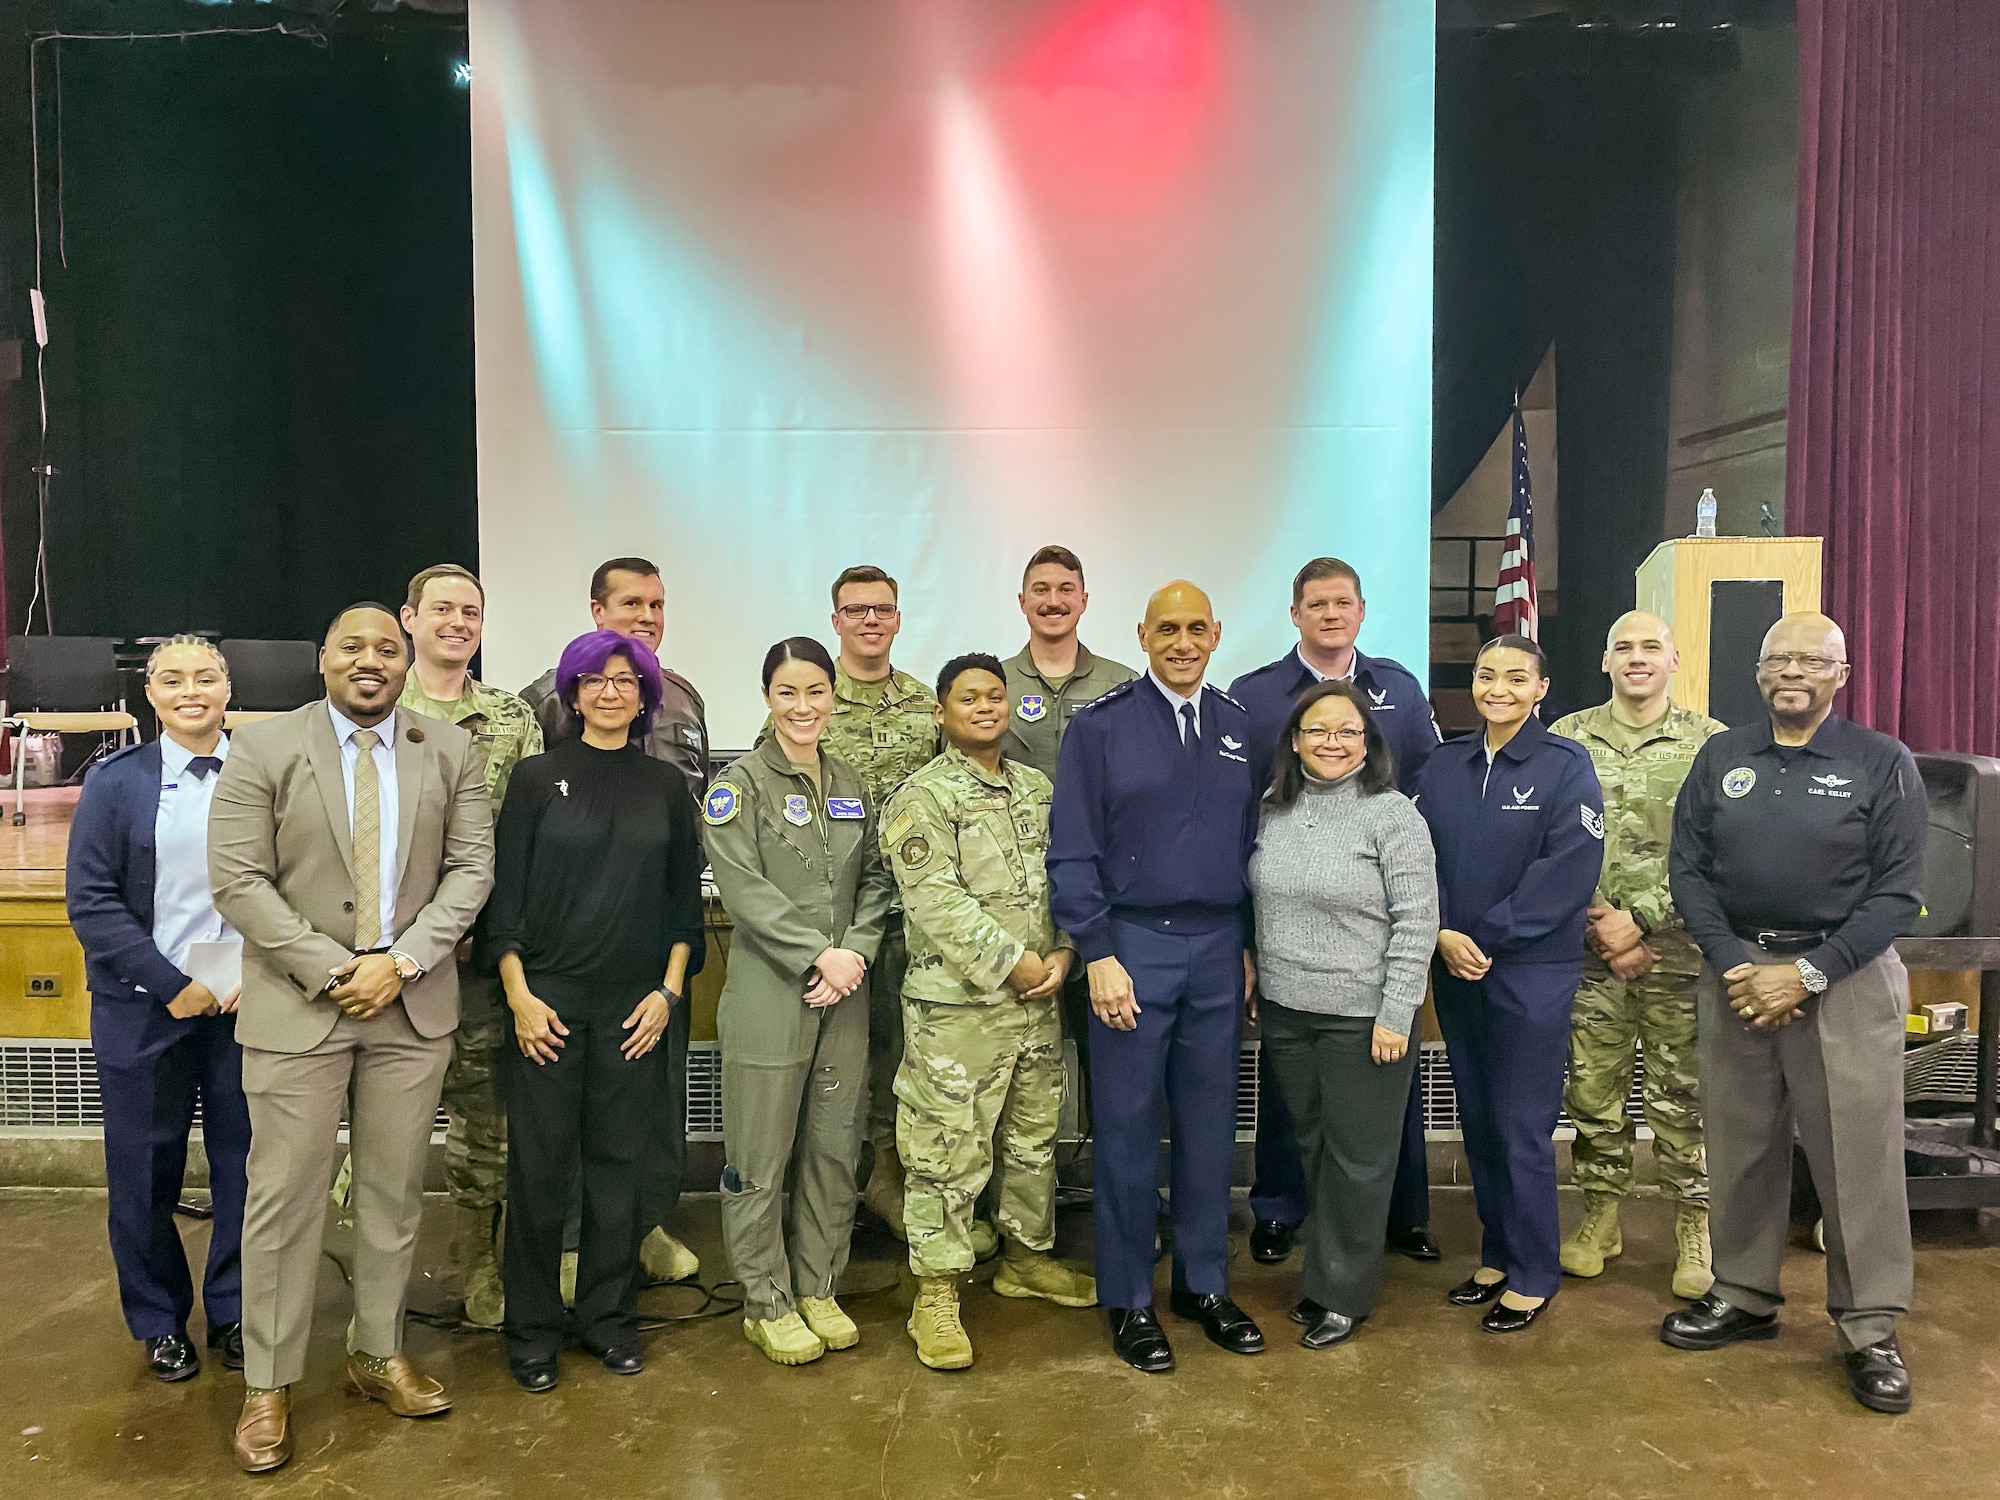 Lt. Gen. Brian Robinson, commander of Air Education and Training Command, and his wife, Maureen Robinson, stand alongside the leaders of George Washington Carver High School of Engineering and Science, members from Joint Base McGuire-Dix-Lakehurst, AFROTC Det. 750, Air Force Recruiting Service, Civil Air Patrol, and Air Force Reserve Command, during a visit to George Washington Carver High School of Engineering and Science at Philadelphia, Pennsylvania, Jan. 16-17, 2024. Robinson’s visit was a part of GO Inspire, a Department of the Air Force recruiting program designed specifically for General Officers to seek out and conduct outreach engagements to engage youth and youth influencers from Underrepresented Groups to increase the diversity of Air and Space Force applicants.